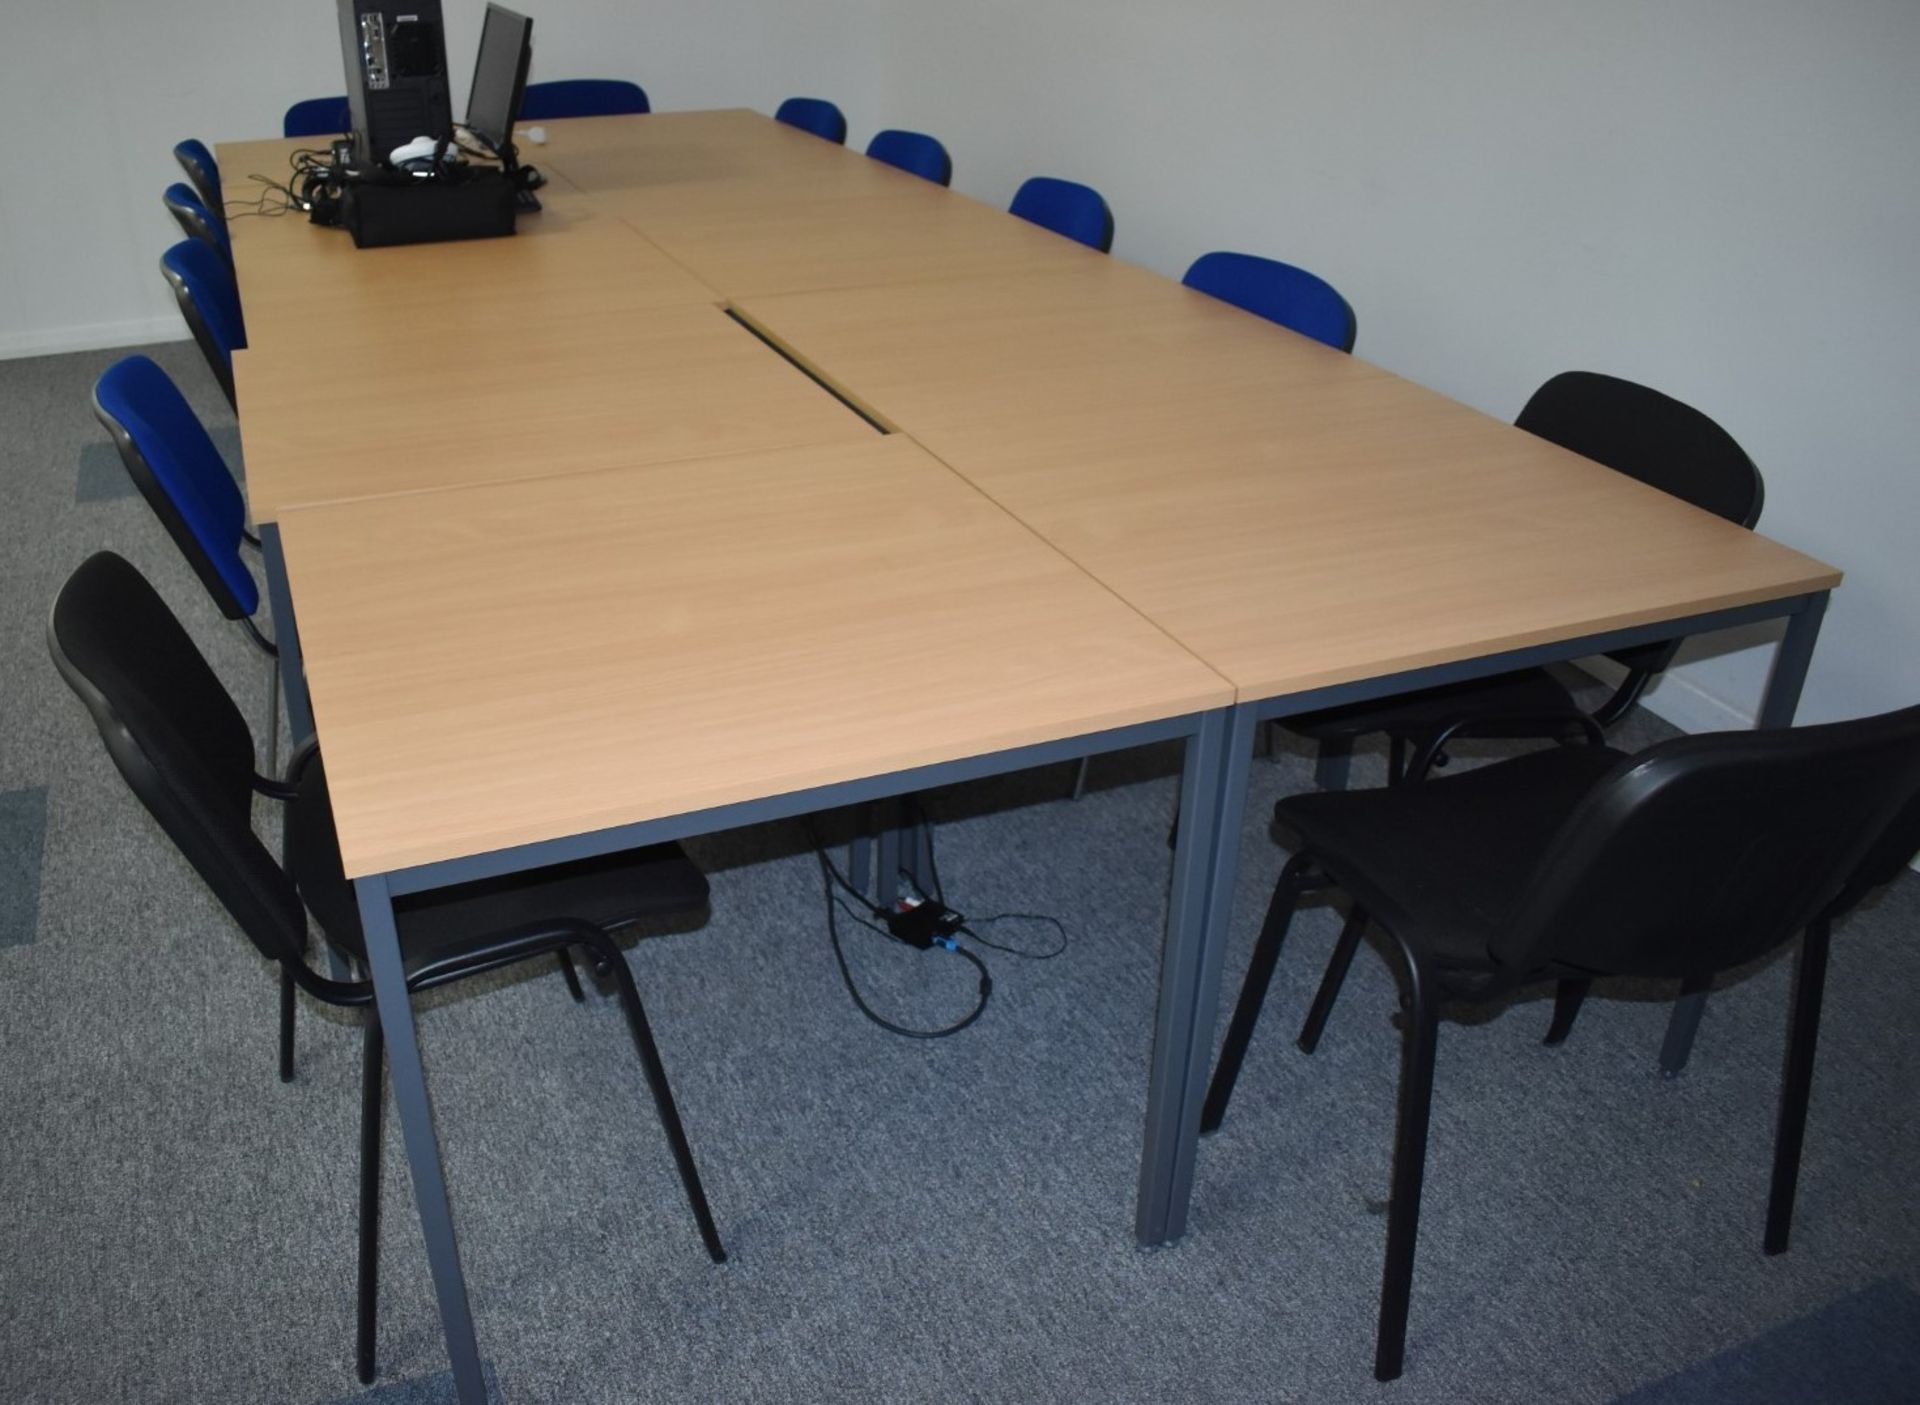 6 x Matching Office Tables With Beech Tops and Dark Grey Bases - CL490 - Location: Putney, London, - Image 2 of 3